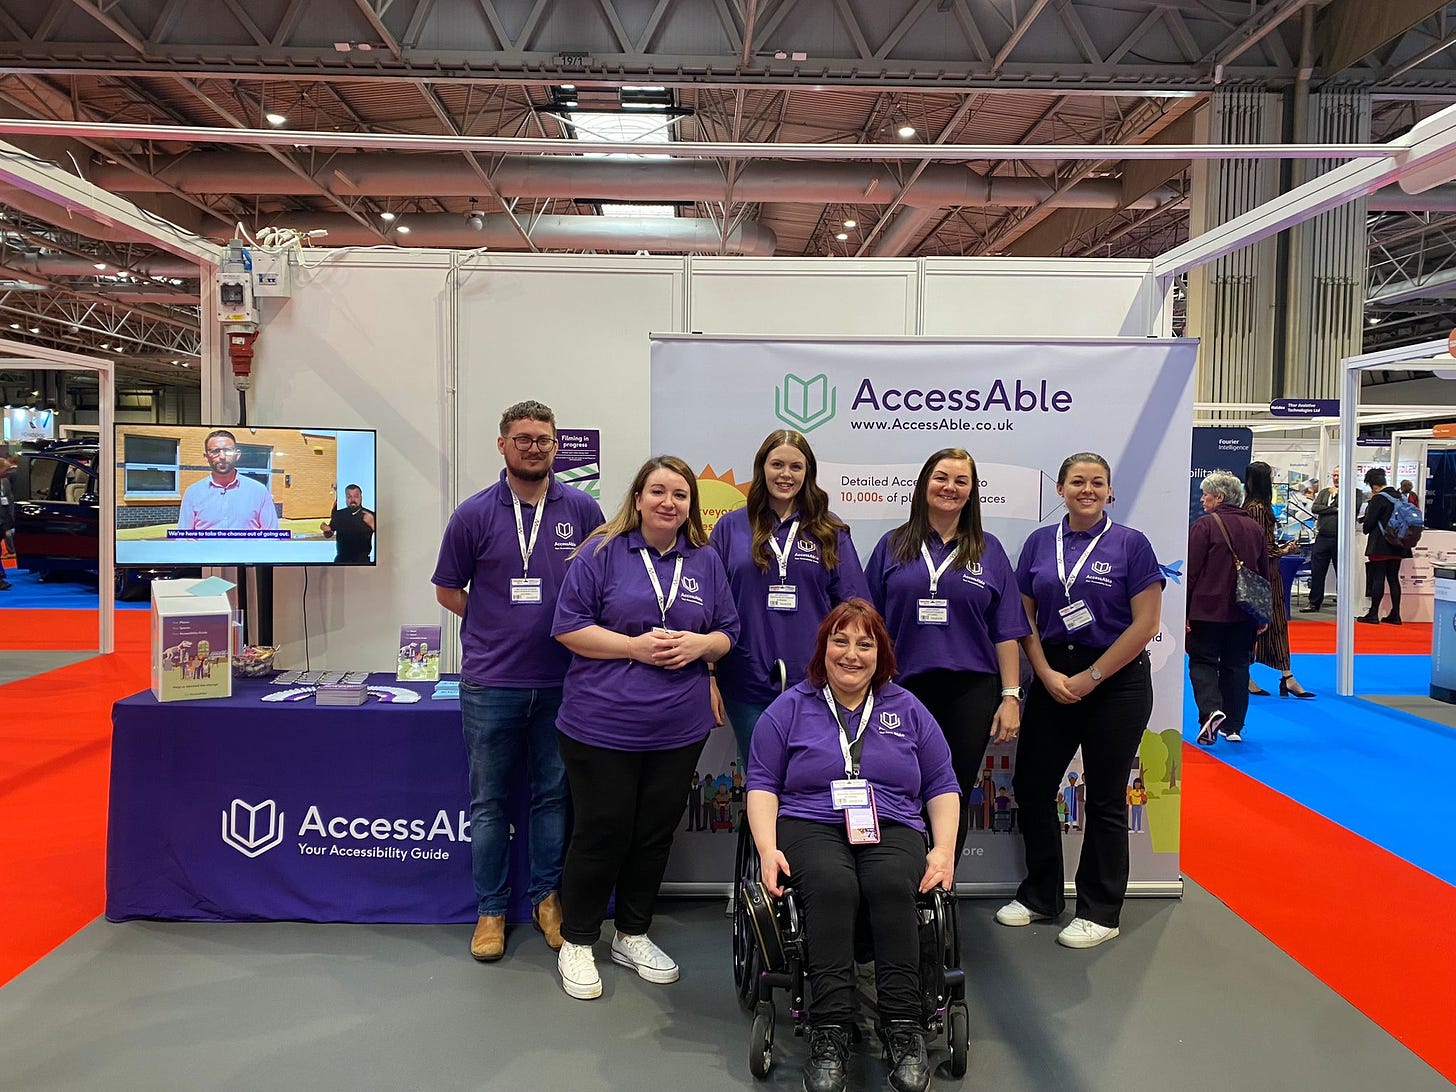 5 white women and 1 white man in purple shirts take a team photo at Naidex on the AccessAble stand. 